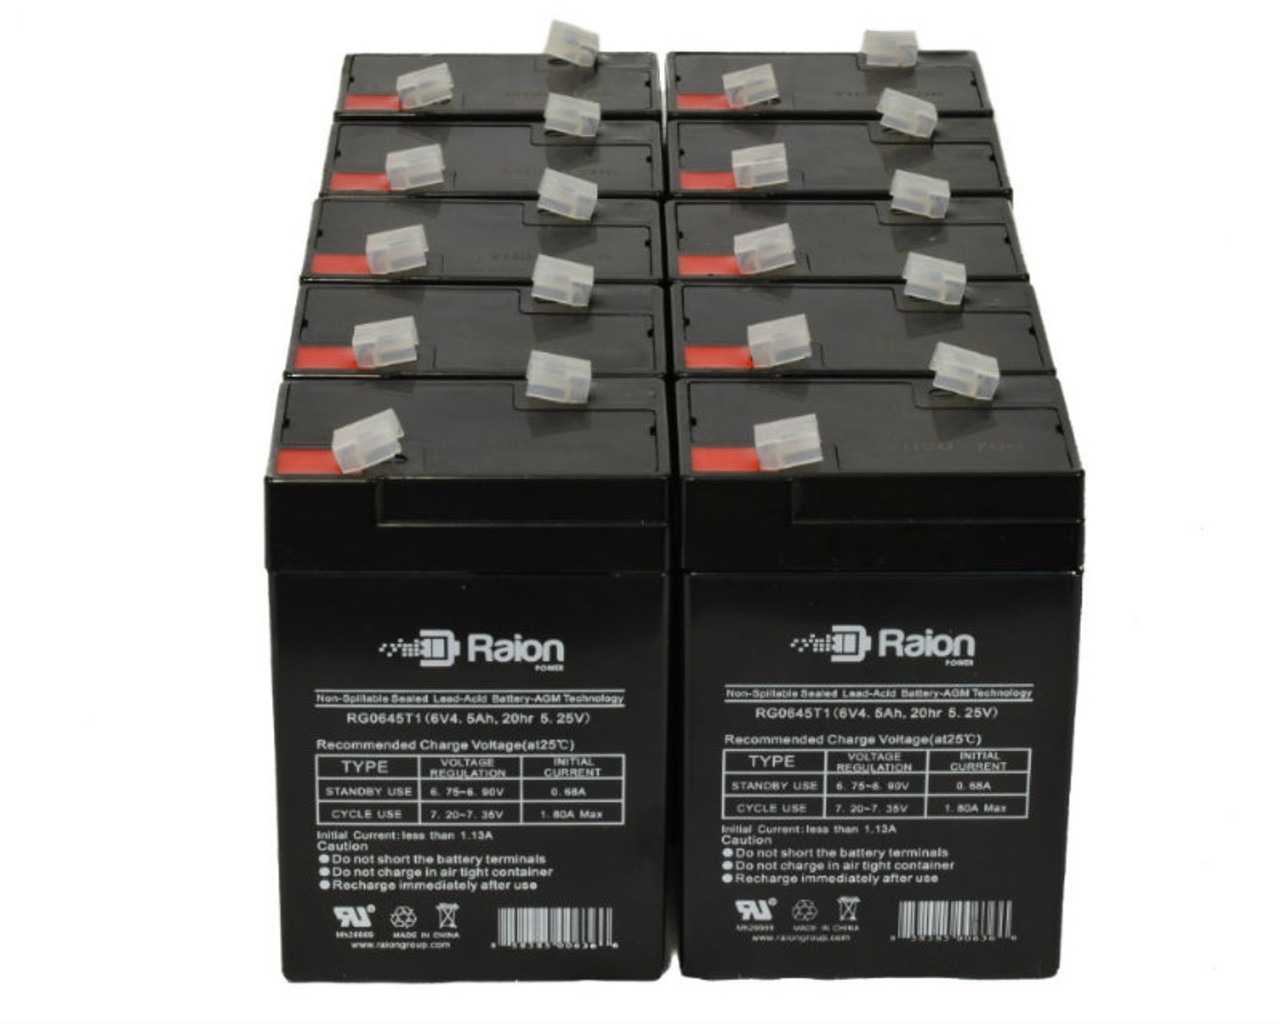 Raion Power 6 Volt 4.5Ah RG0645T1 Replacement Battery for Excel XL640 - 10 Pack